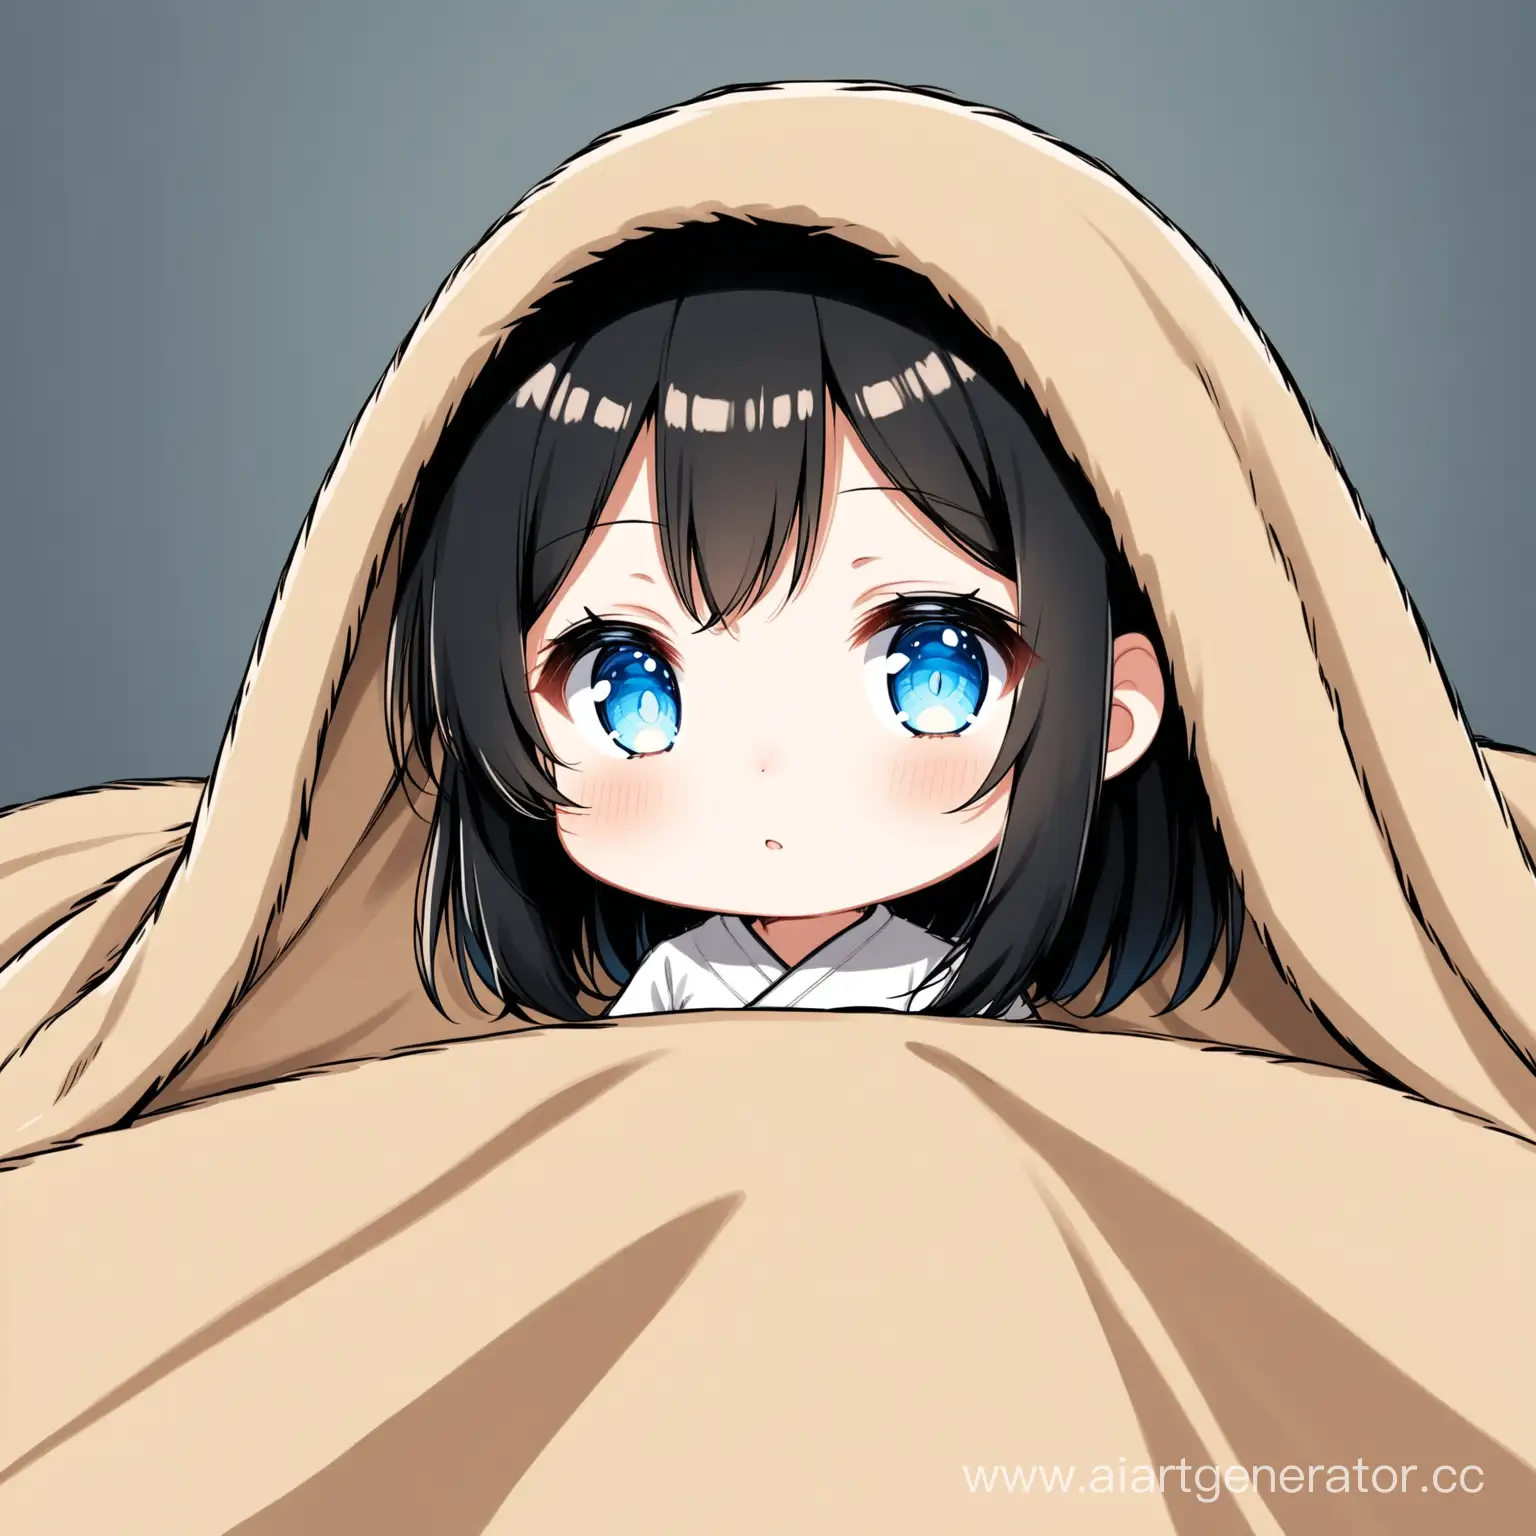 Cozy-Anime-Chibi-Girl-with-Black-Hair-and-Light-Blue-Eyes-Snuggled-Under-a-Blanket